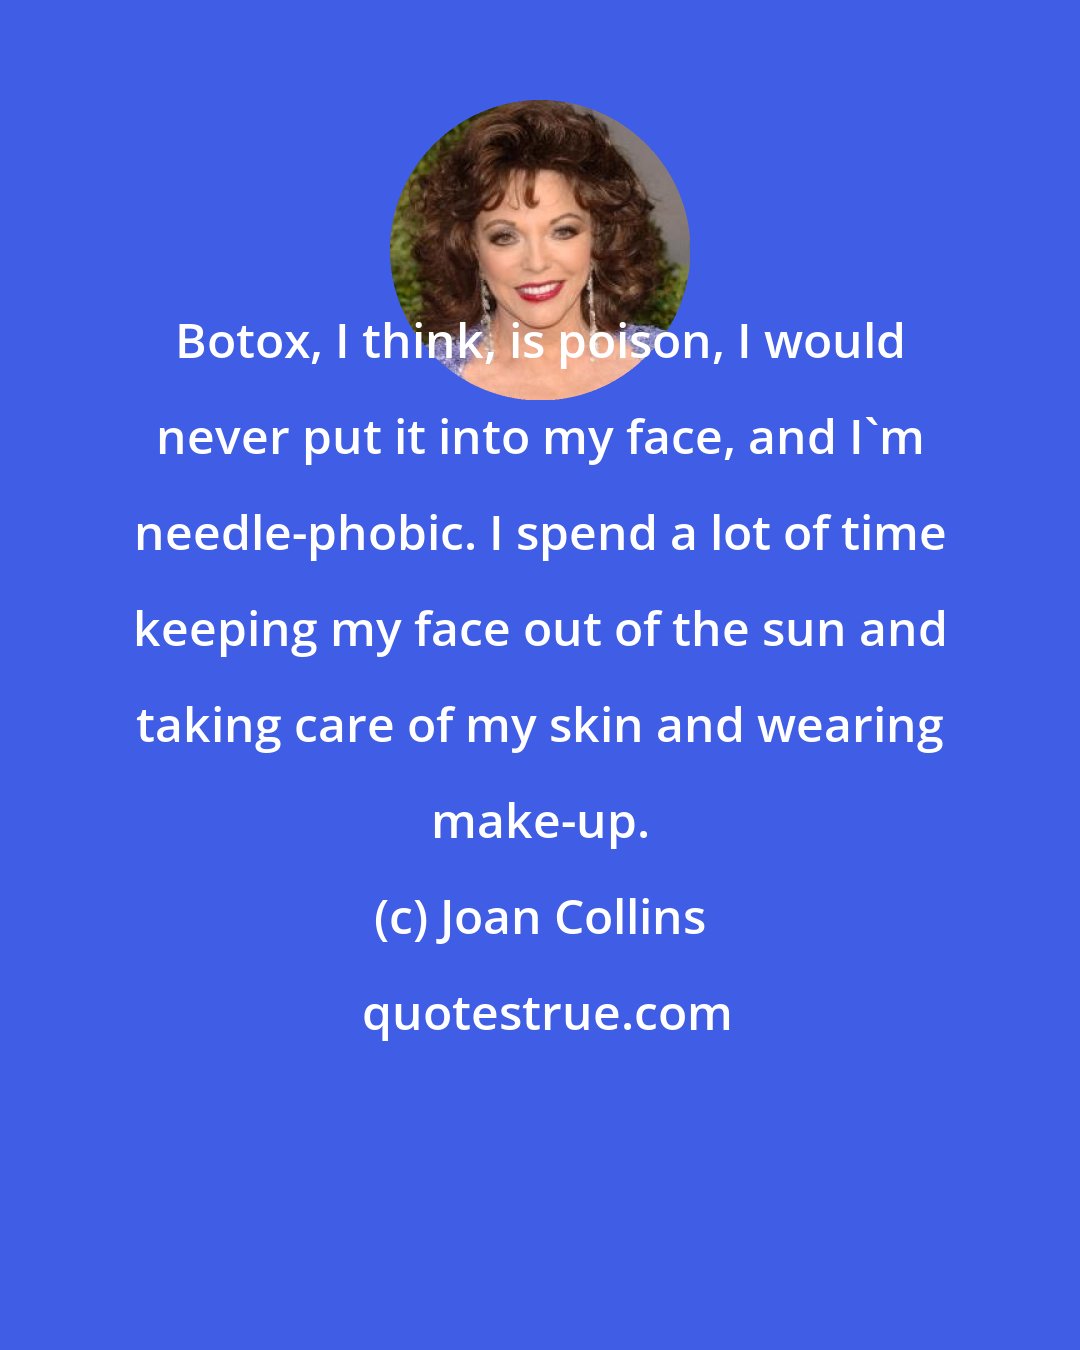 Joan Collins: Botox, I think, is poison, I would never put it into my face, and I'm needle-phobic. I spend a lot of time keeping my face out of the sun and taking care of my skin and wearing make-up.